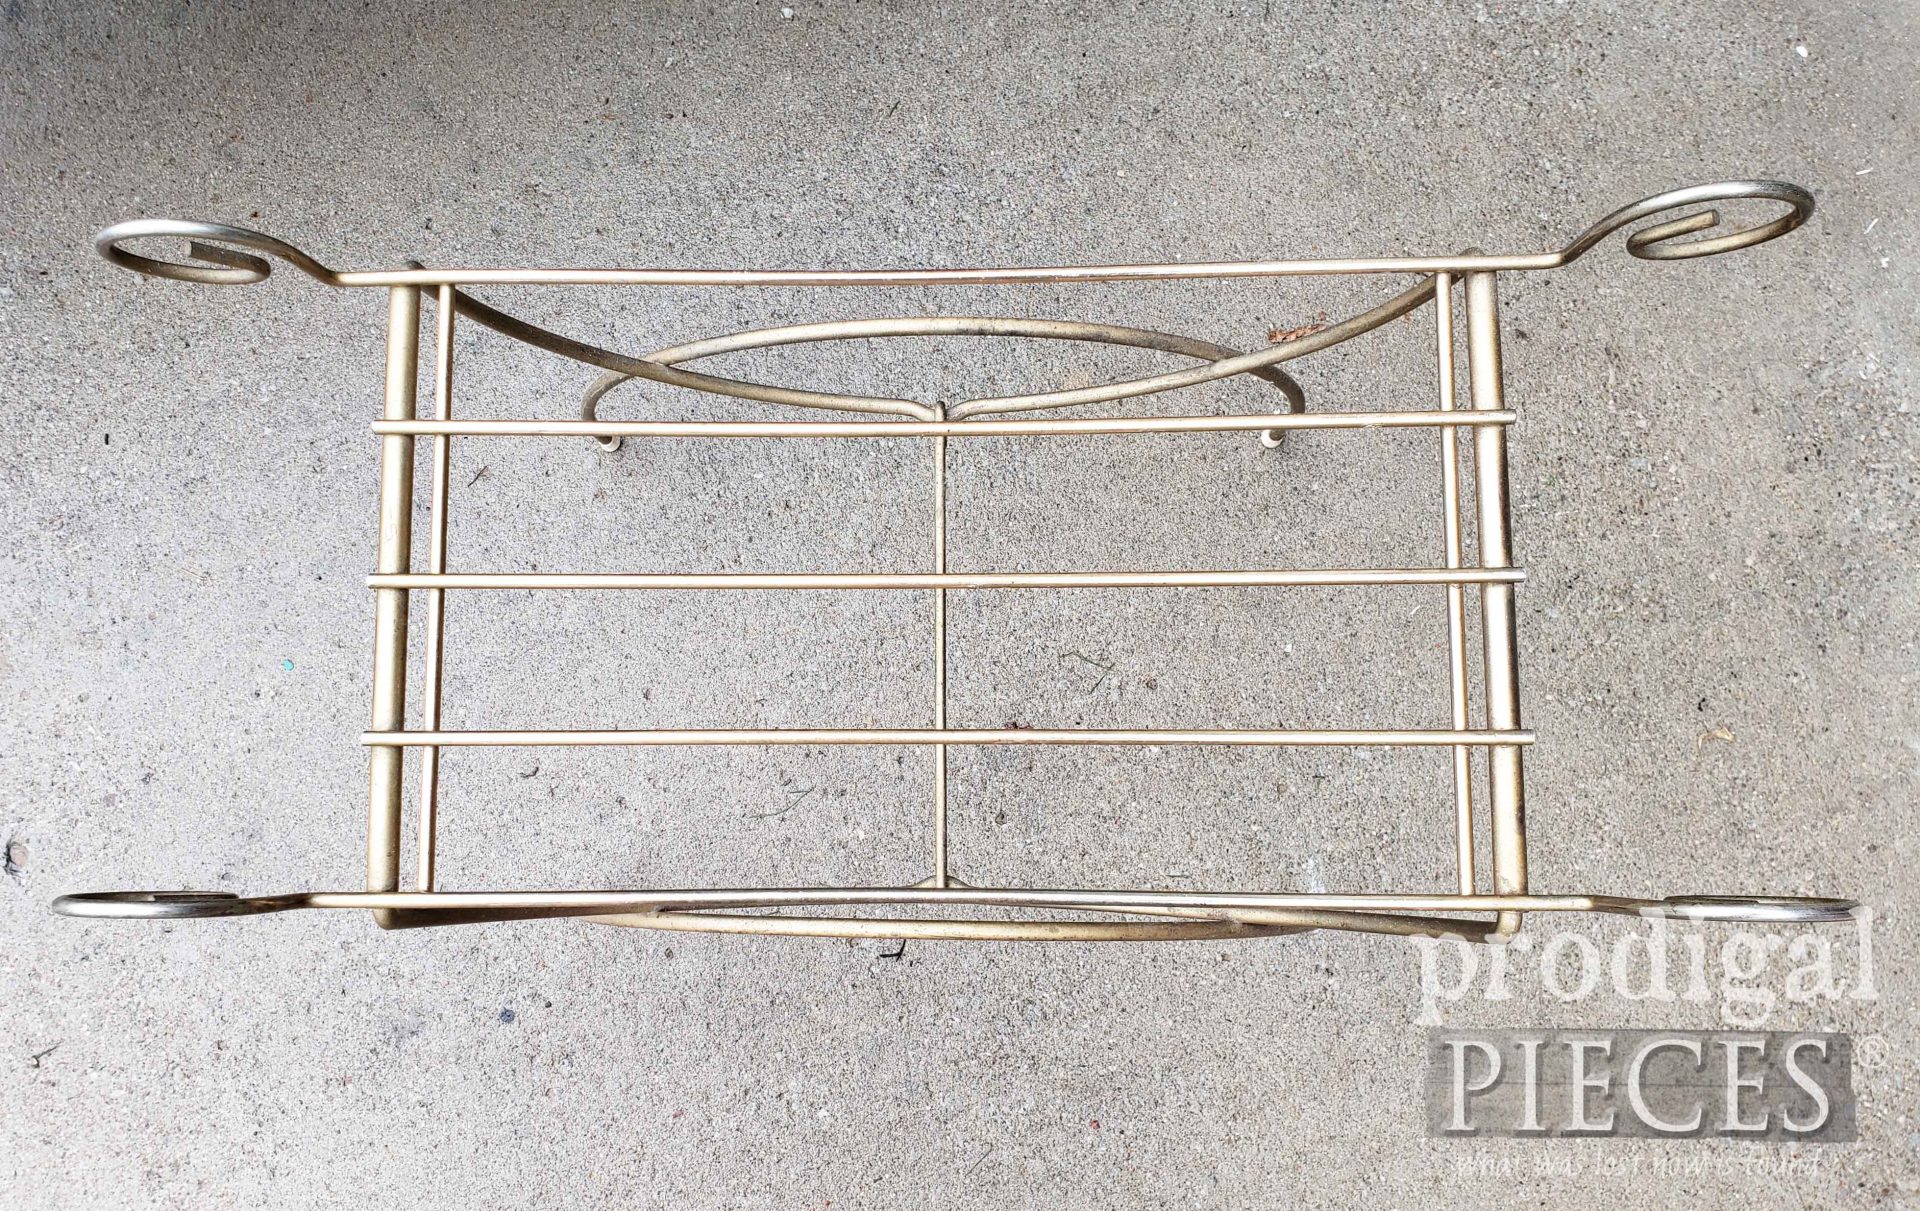 Top View of Wire Vanity Seat by Larissa of Prodigal Pieces | prodigalpieces.com